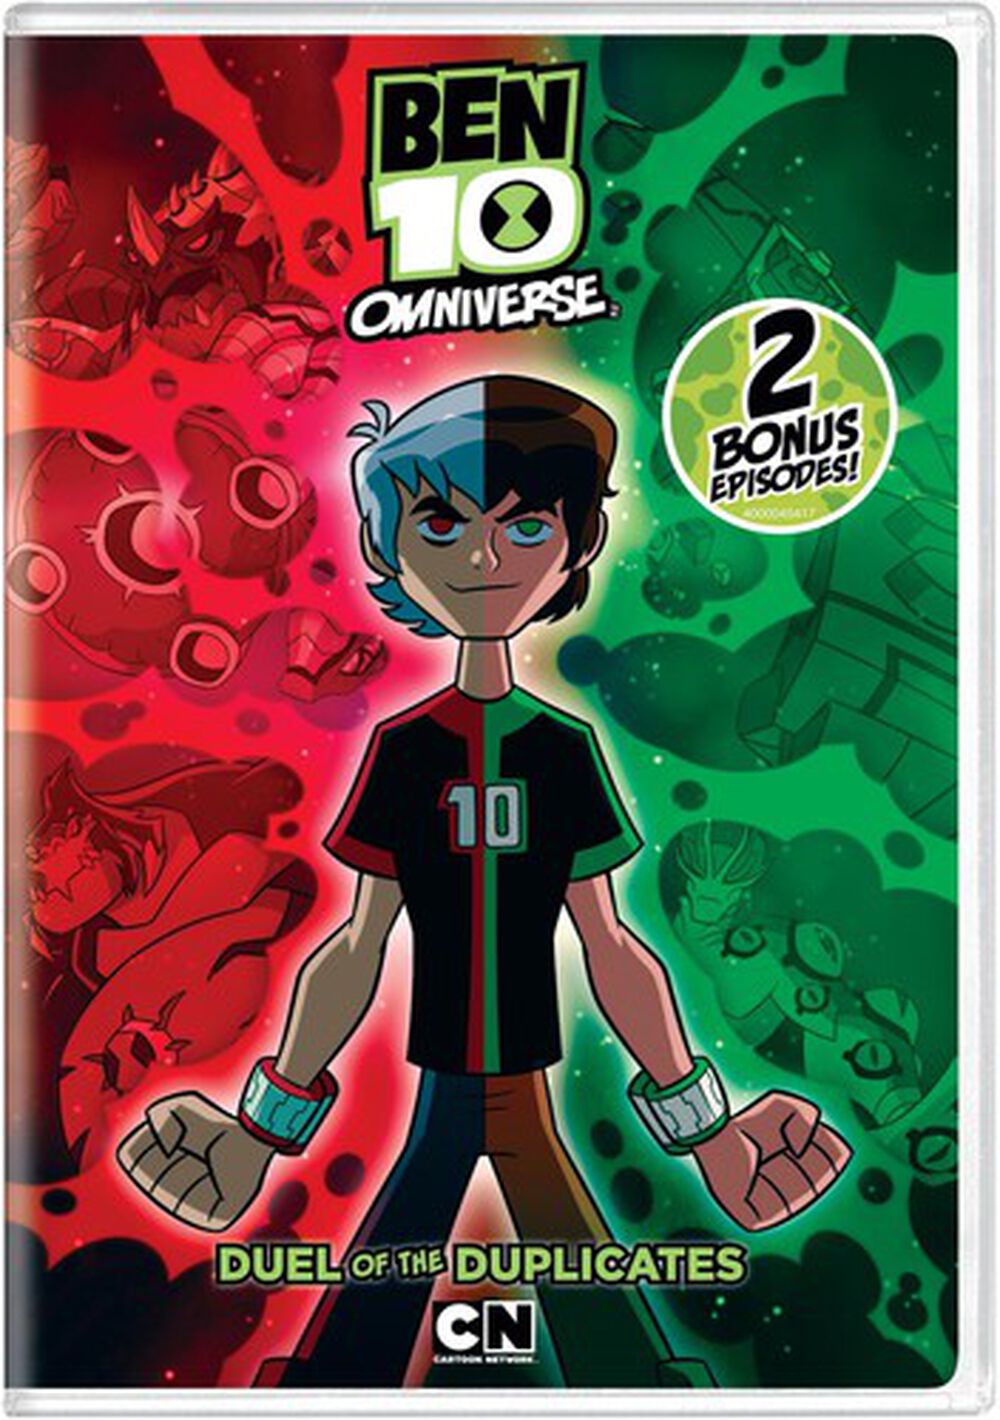 Ben 10 Omniverse: Duel of the Duplicates on DVD